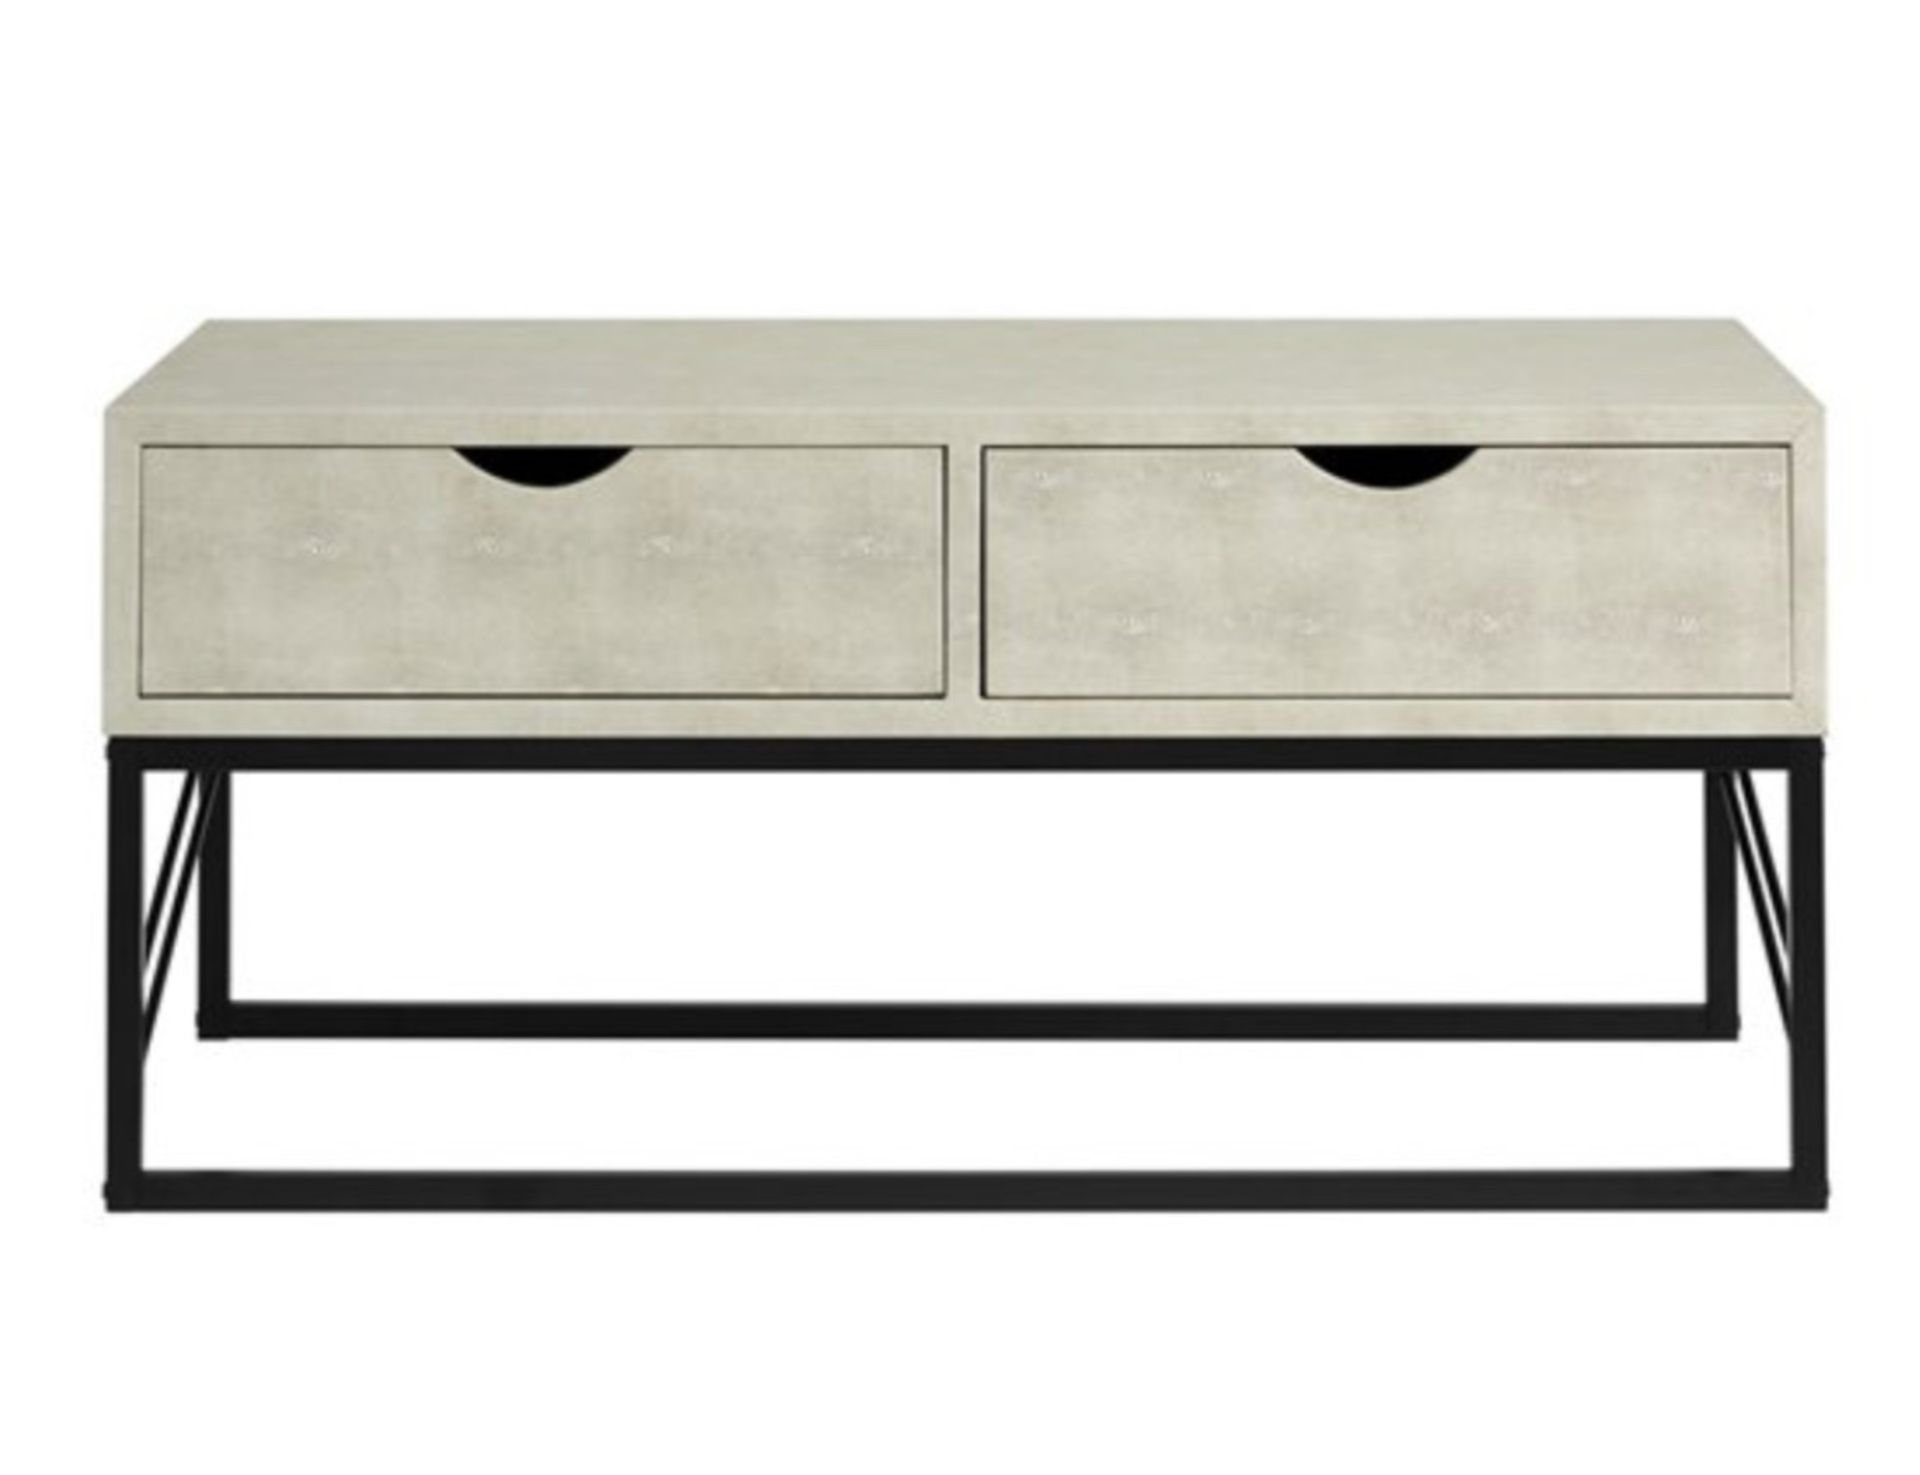 EYNESFORD 2 DRAWER FAUX SHAGREEN COFFEE TABLE IN OFF WHITE - RRP £349 - Image 5 of 5